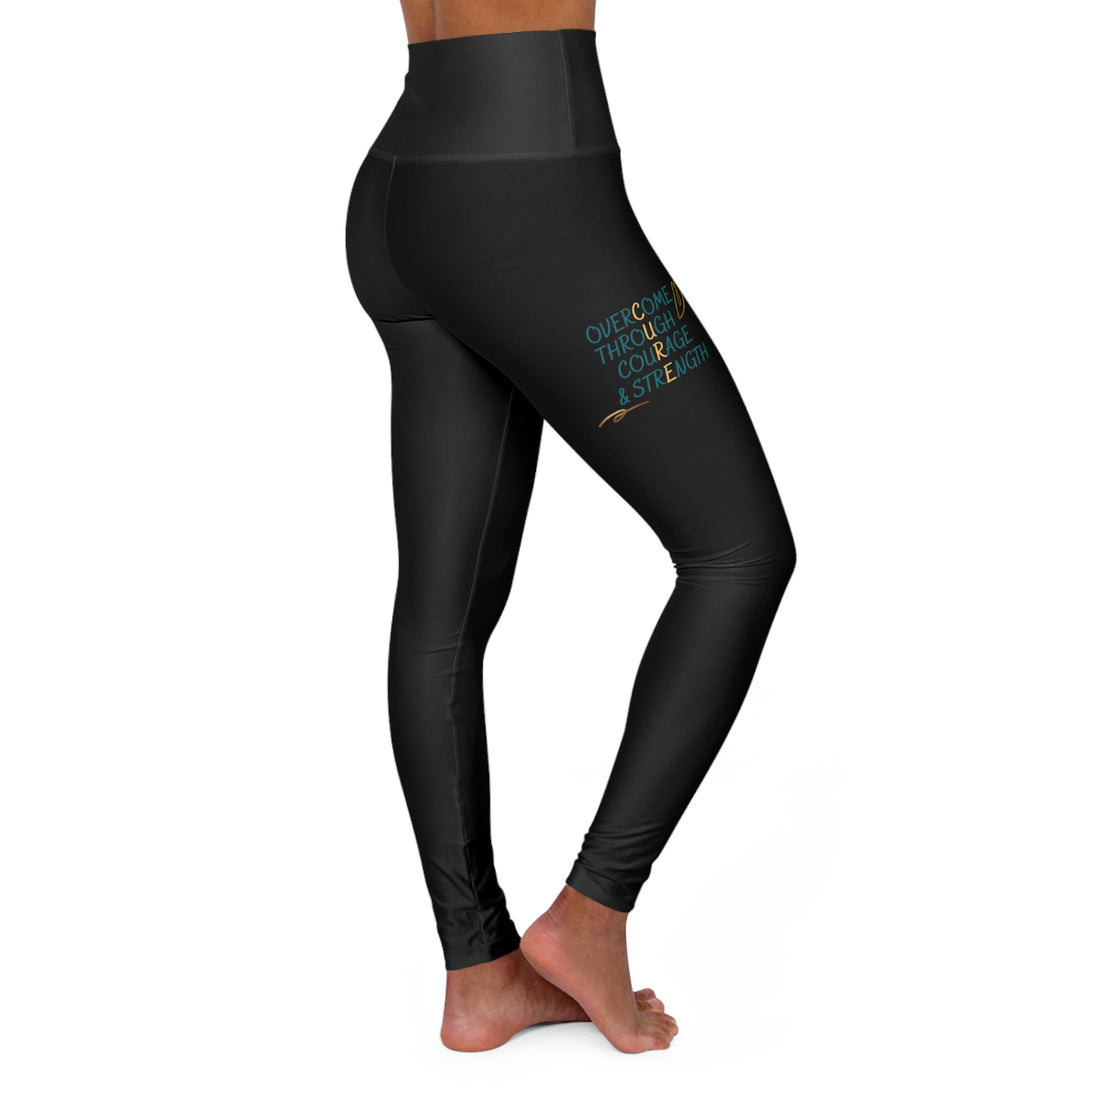 Overcome Through Courage and Strength - Black High Waisted Yoga Leggings